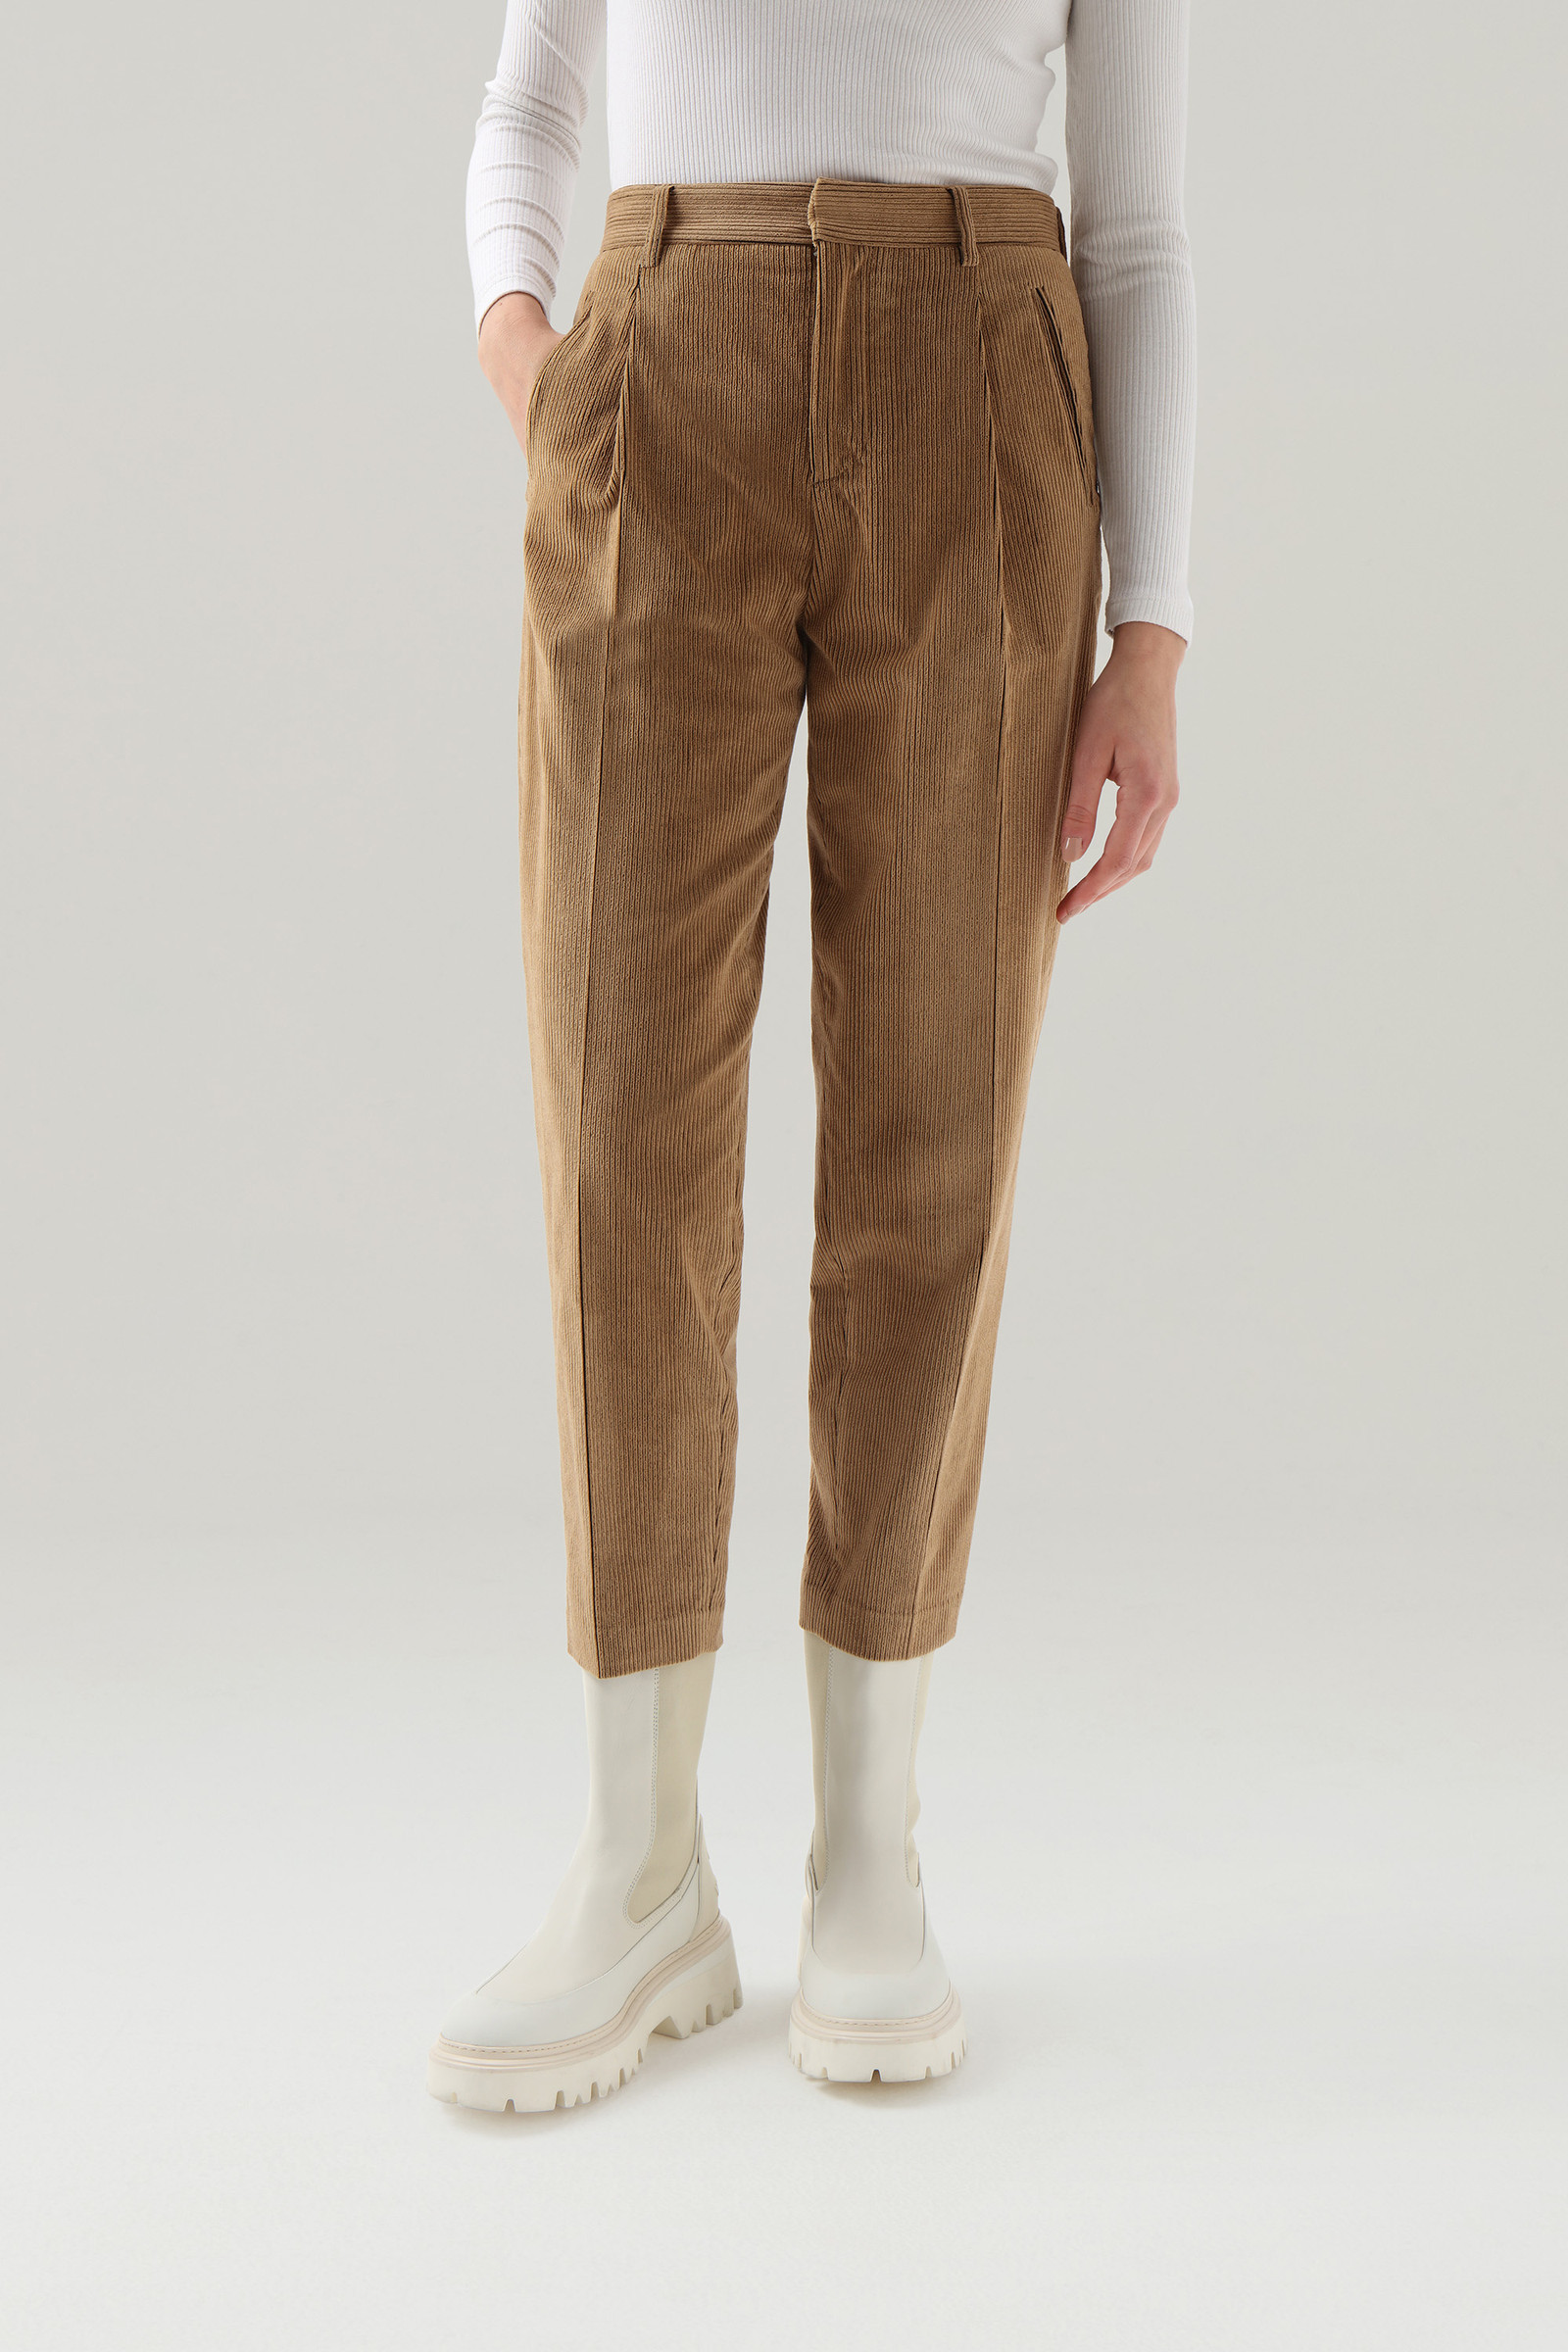 Buy Joules Calla Cord Tapered Leg Trousers from the Joules online shop